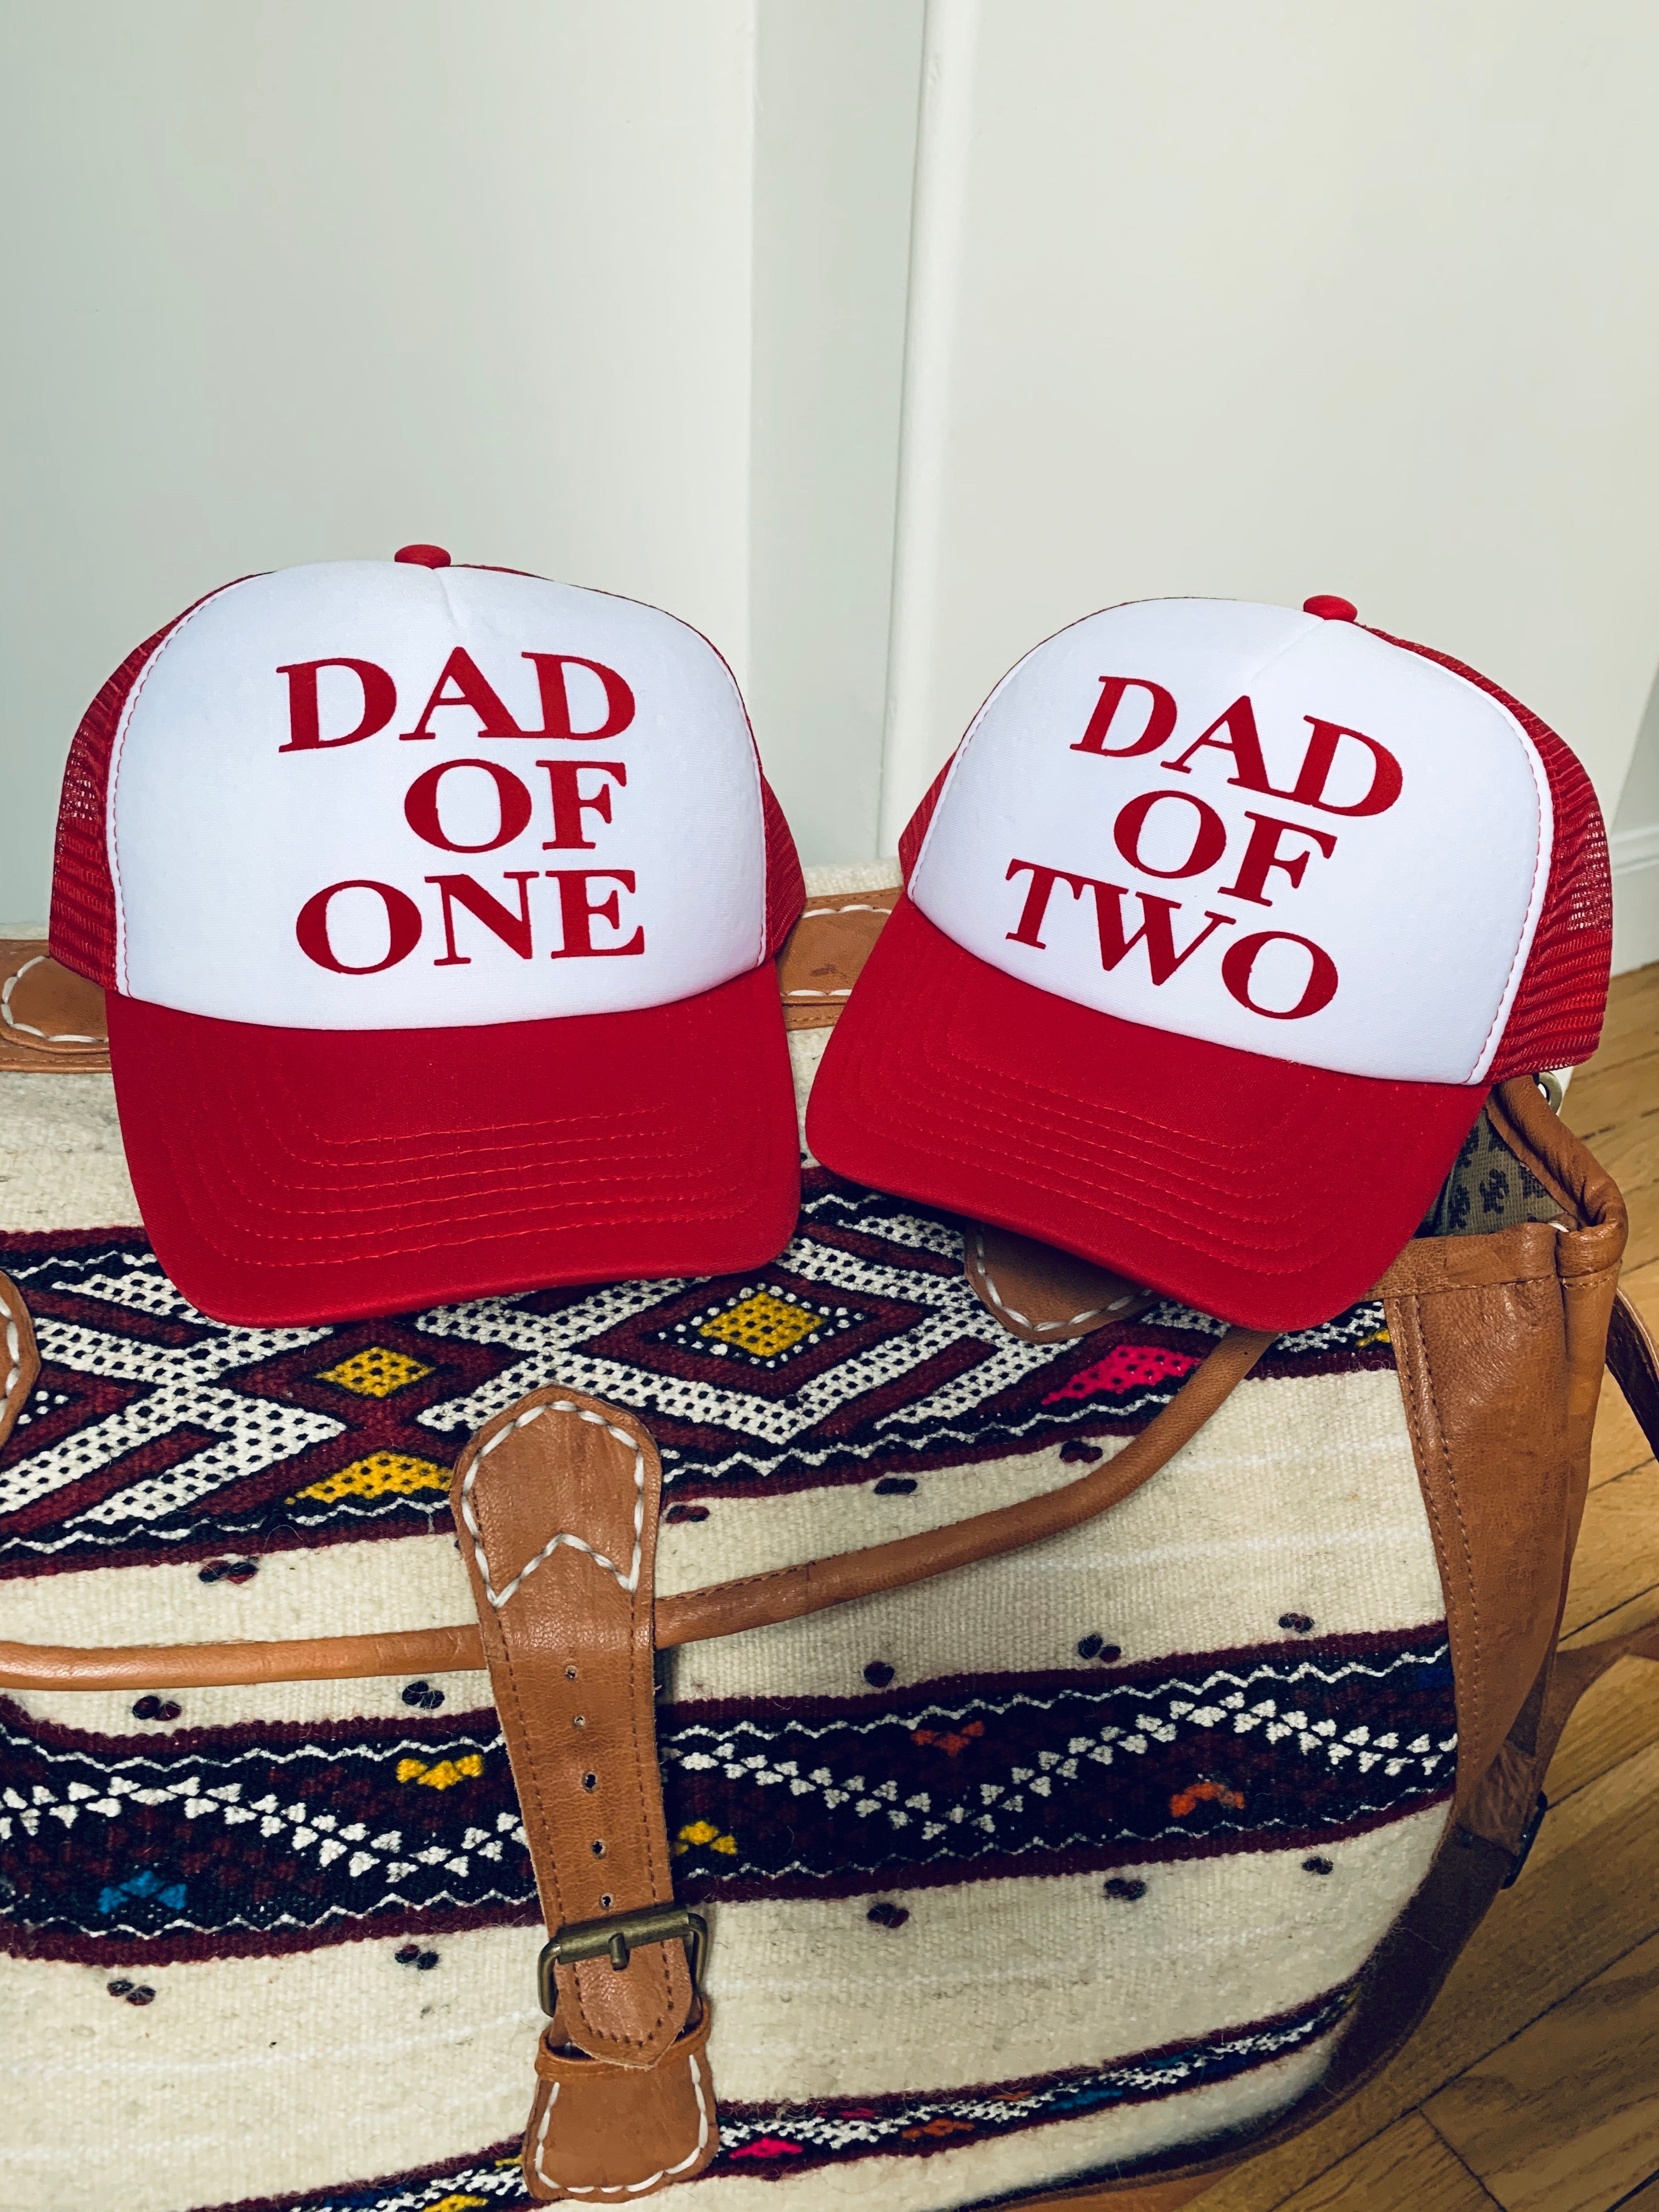 DAD OF CAP - RED AND WHITE - Available for DAD OF ONE, TWO, THREE...